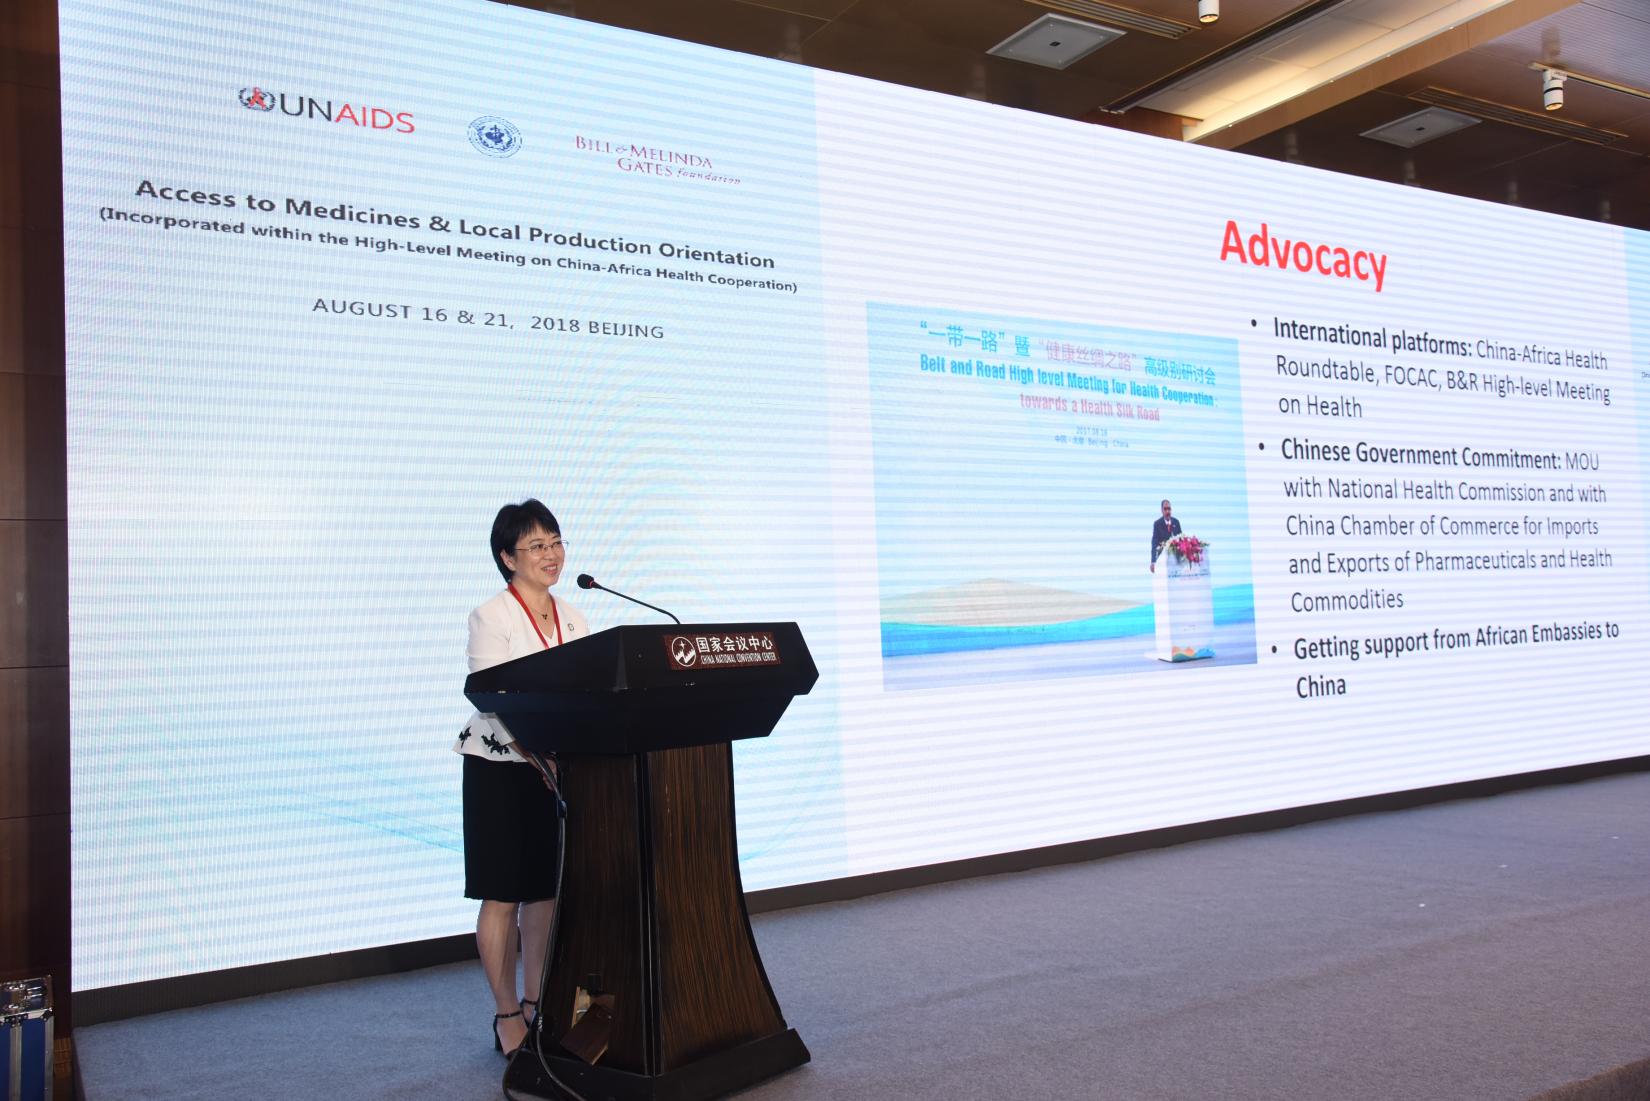 Dr. Zhou Kai delivering a keynote speech about the accessibility of medicine and local production at a high-level meeting on China-Africa cooperation in 2018